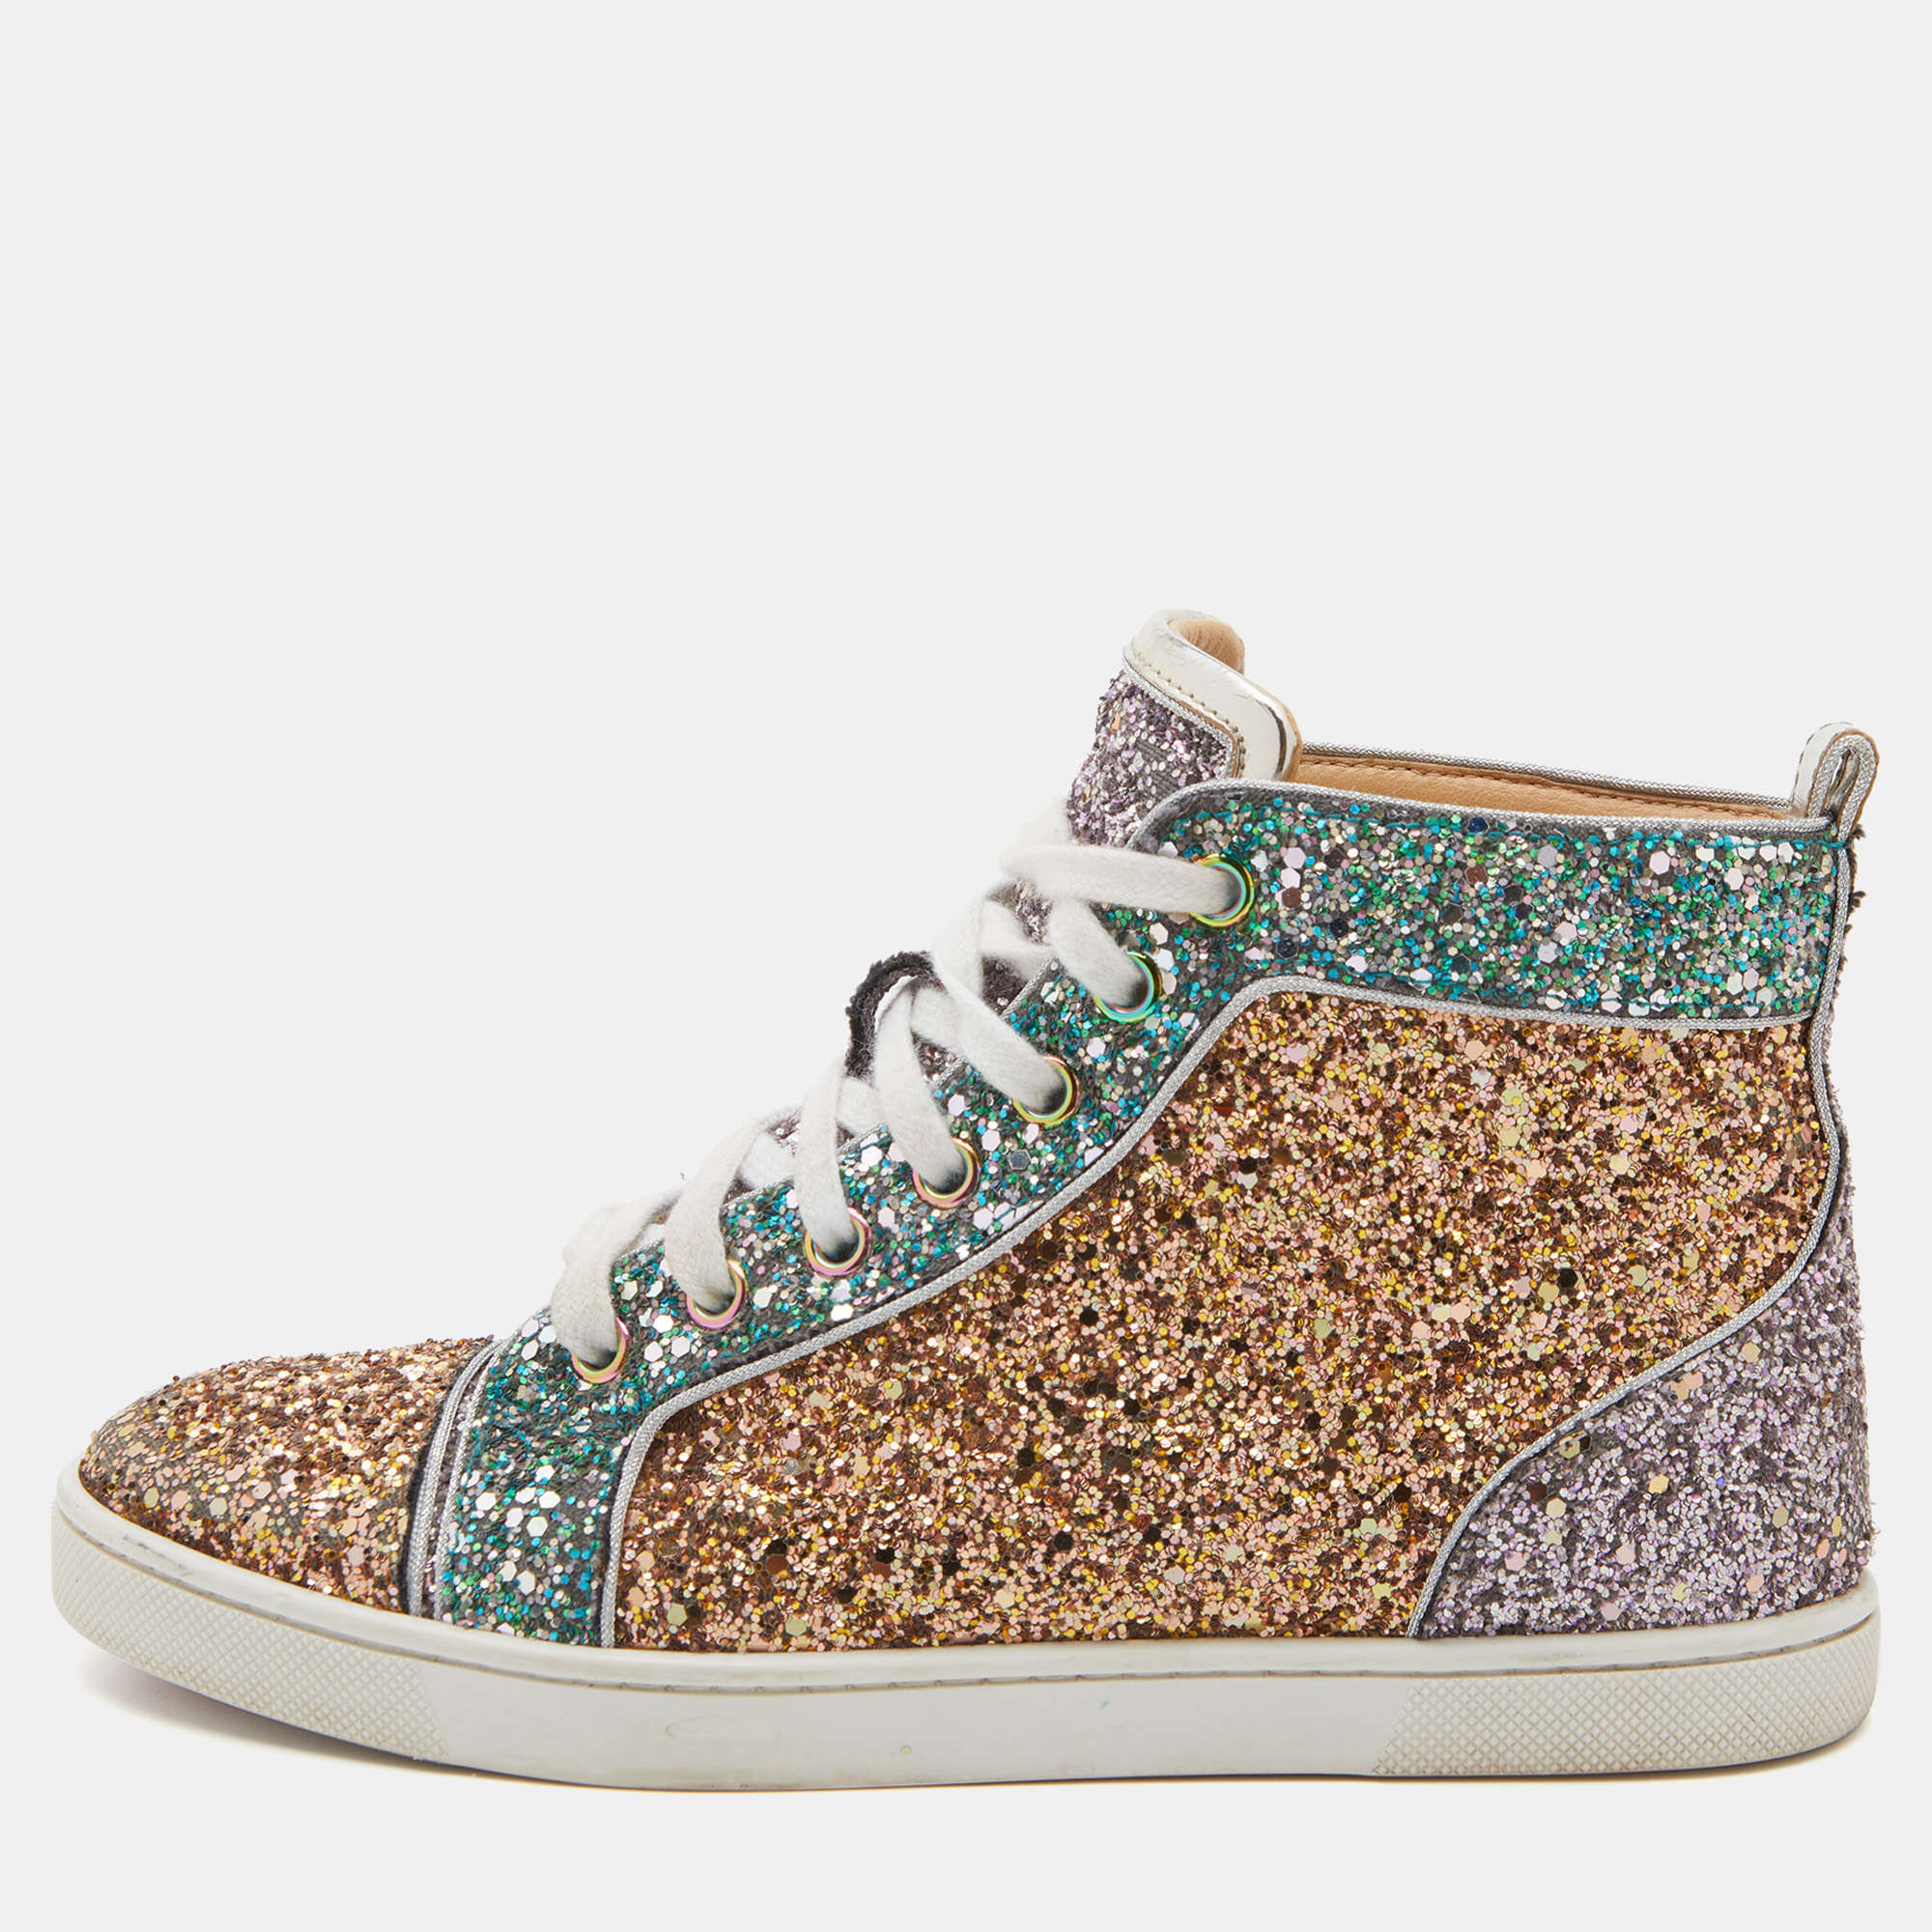 Pre-owned Christian Louboutin Multicolor Glitter Fabric Bip Bip High Top Trainers Size 35.5